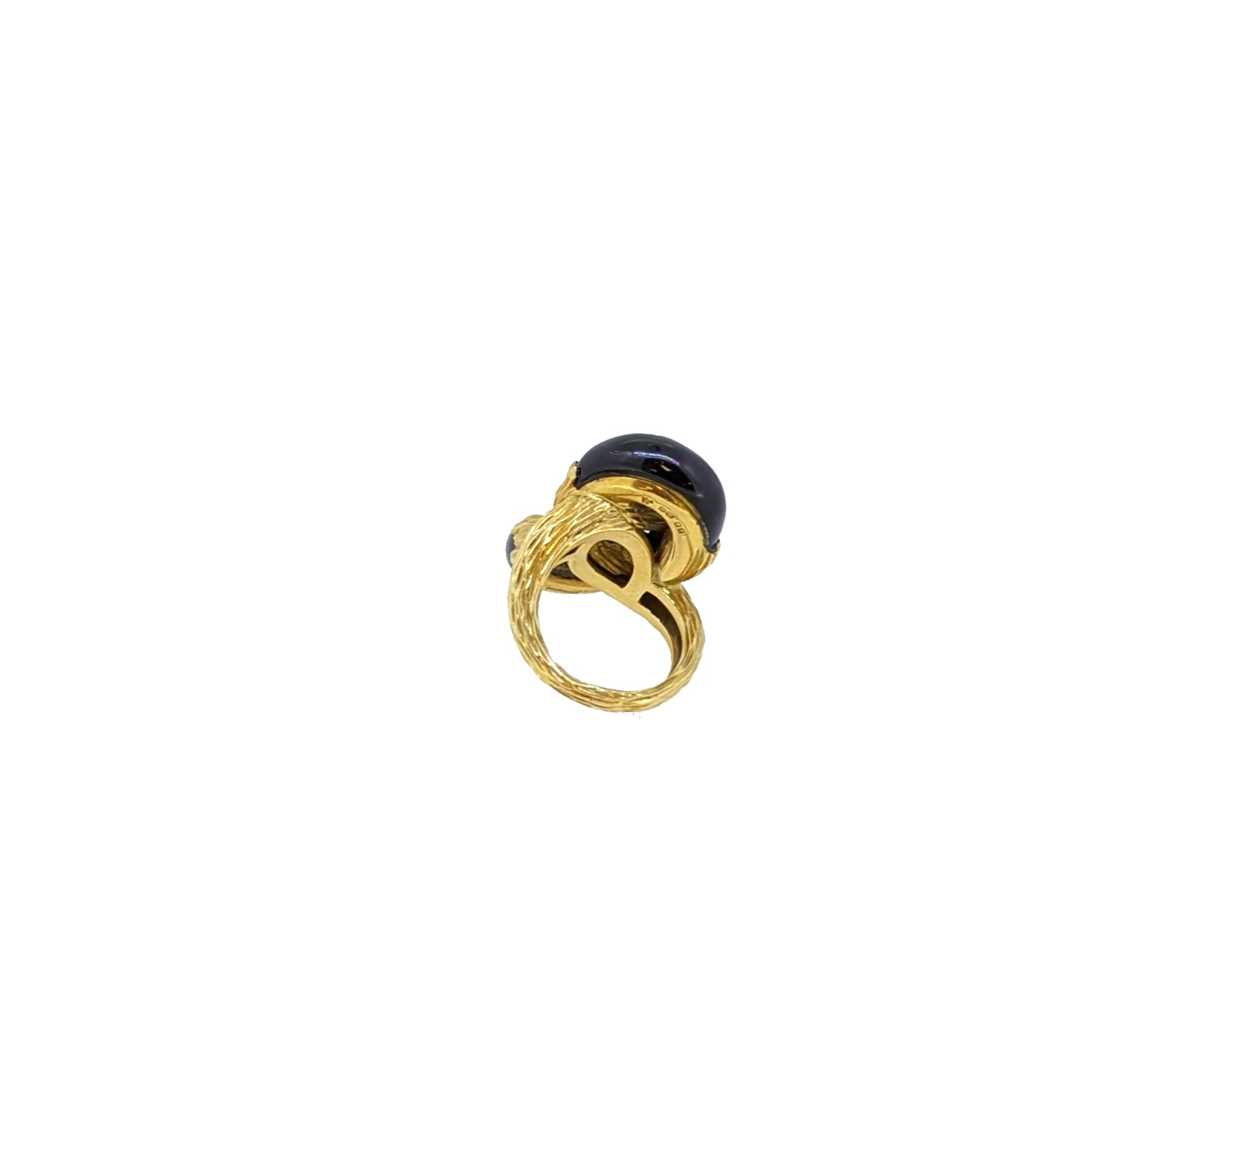 Kutchinsky - An 18ct gold onyx ring, - Image 3 of 6